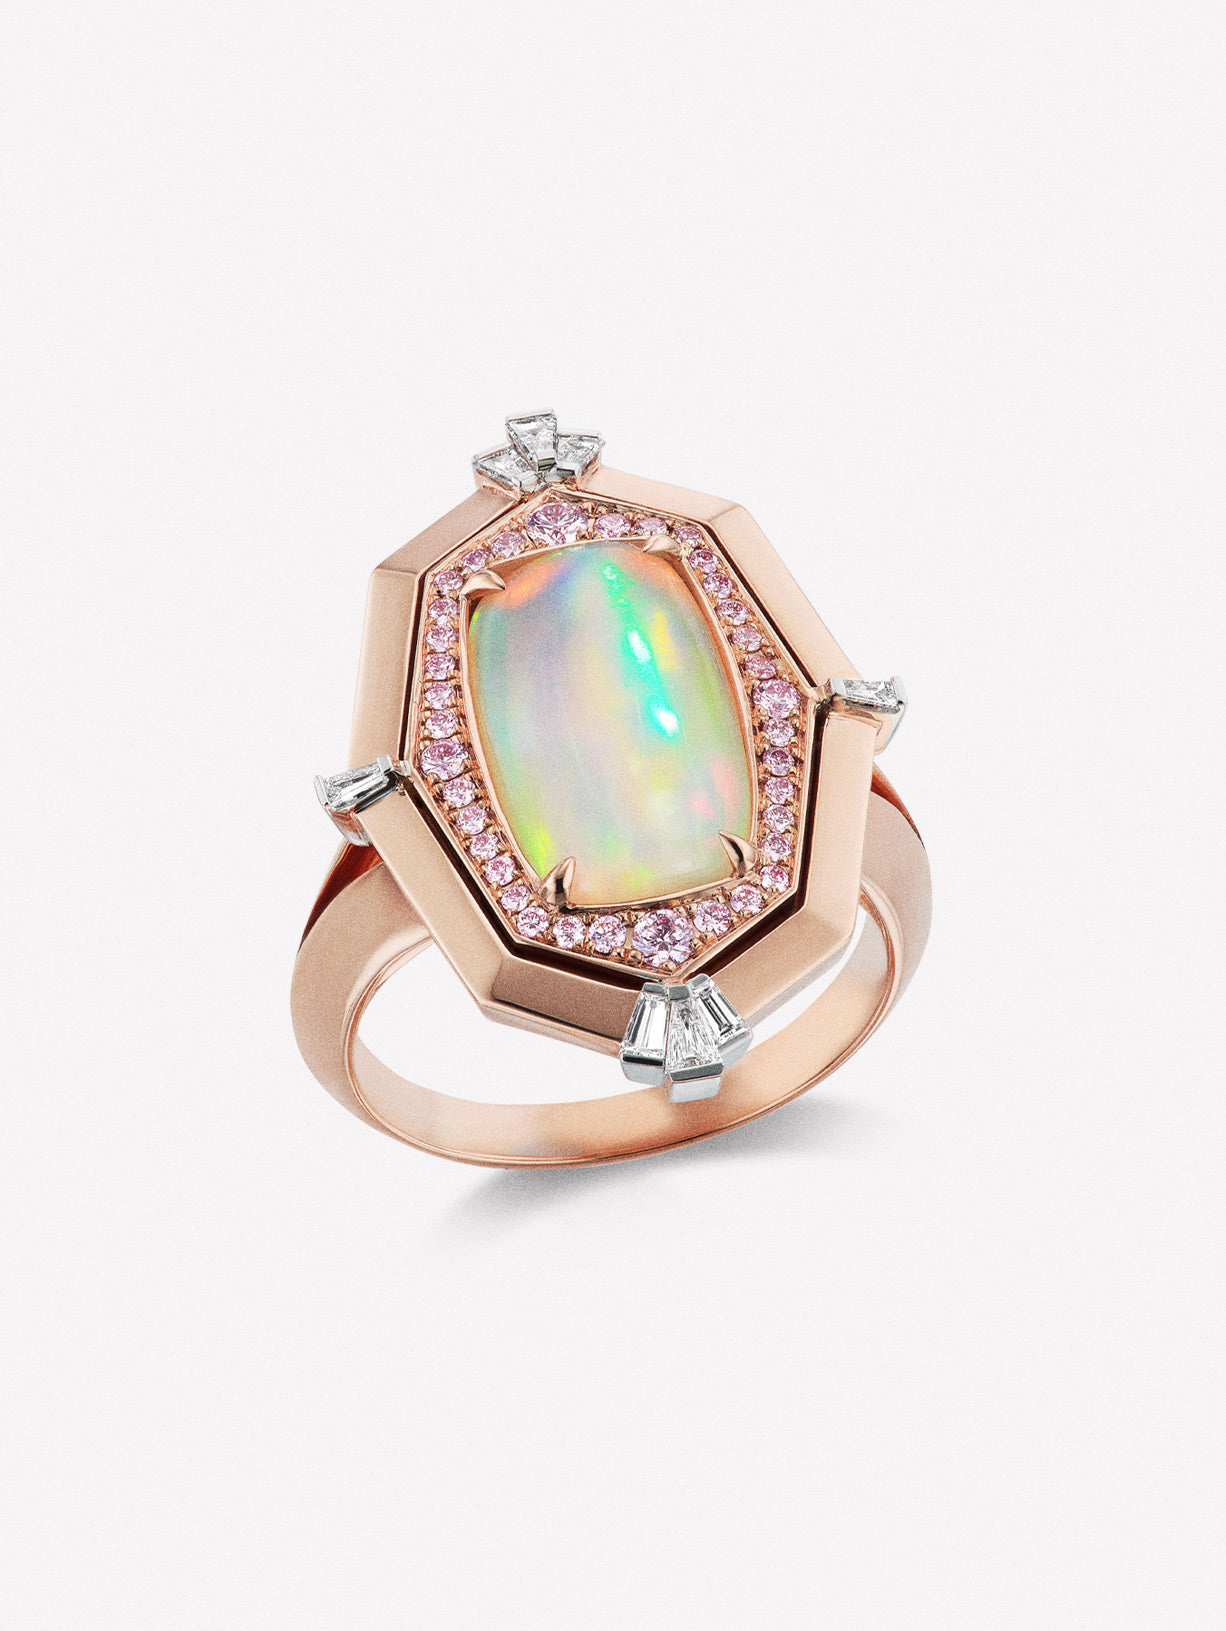 Argyle Pink™ Diamond and White Opal Ring - Pink Diamonds, J FINE - J Fine, Rings - Pink Diamond Jewelry, argyle-pink™-diamond-and-white-opal-ring-by-j-fine - Argyle Pink Diamonds